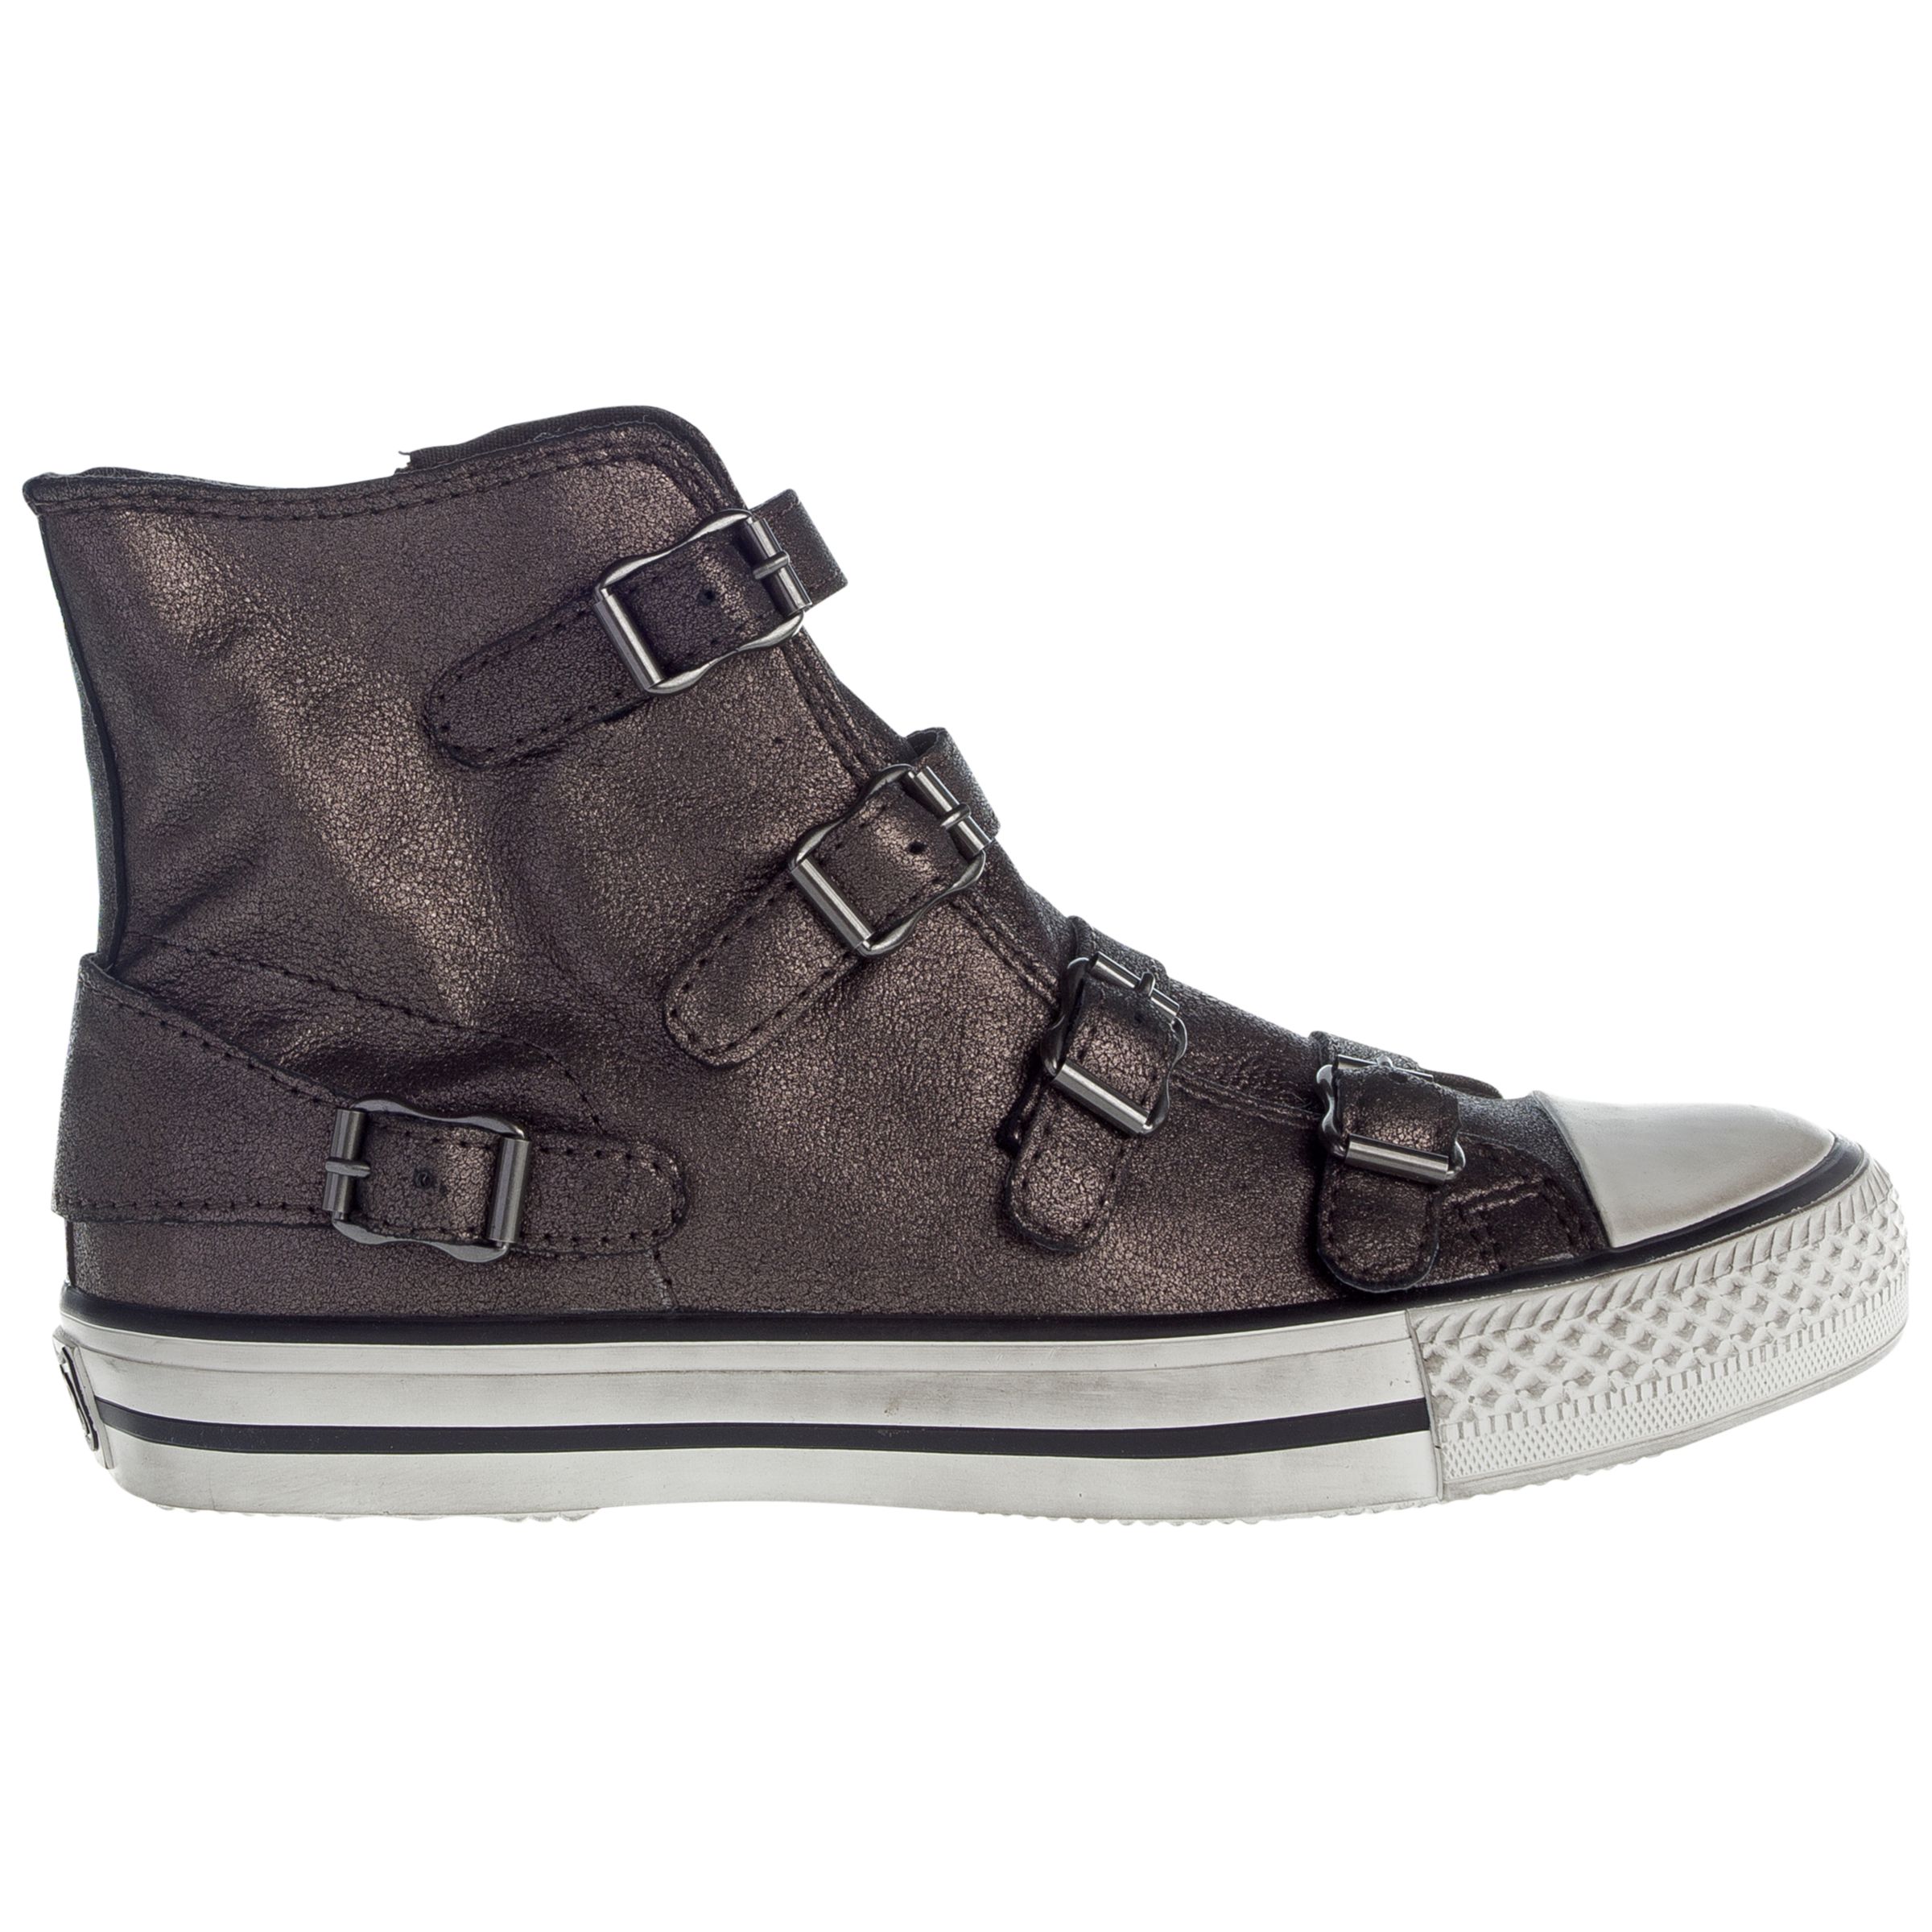 Ash Virgin Buckled High Top Trainers at John Lewis & Partners